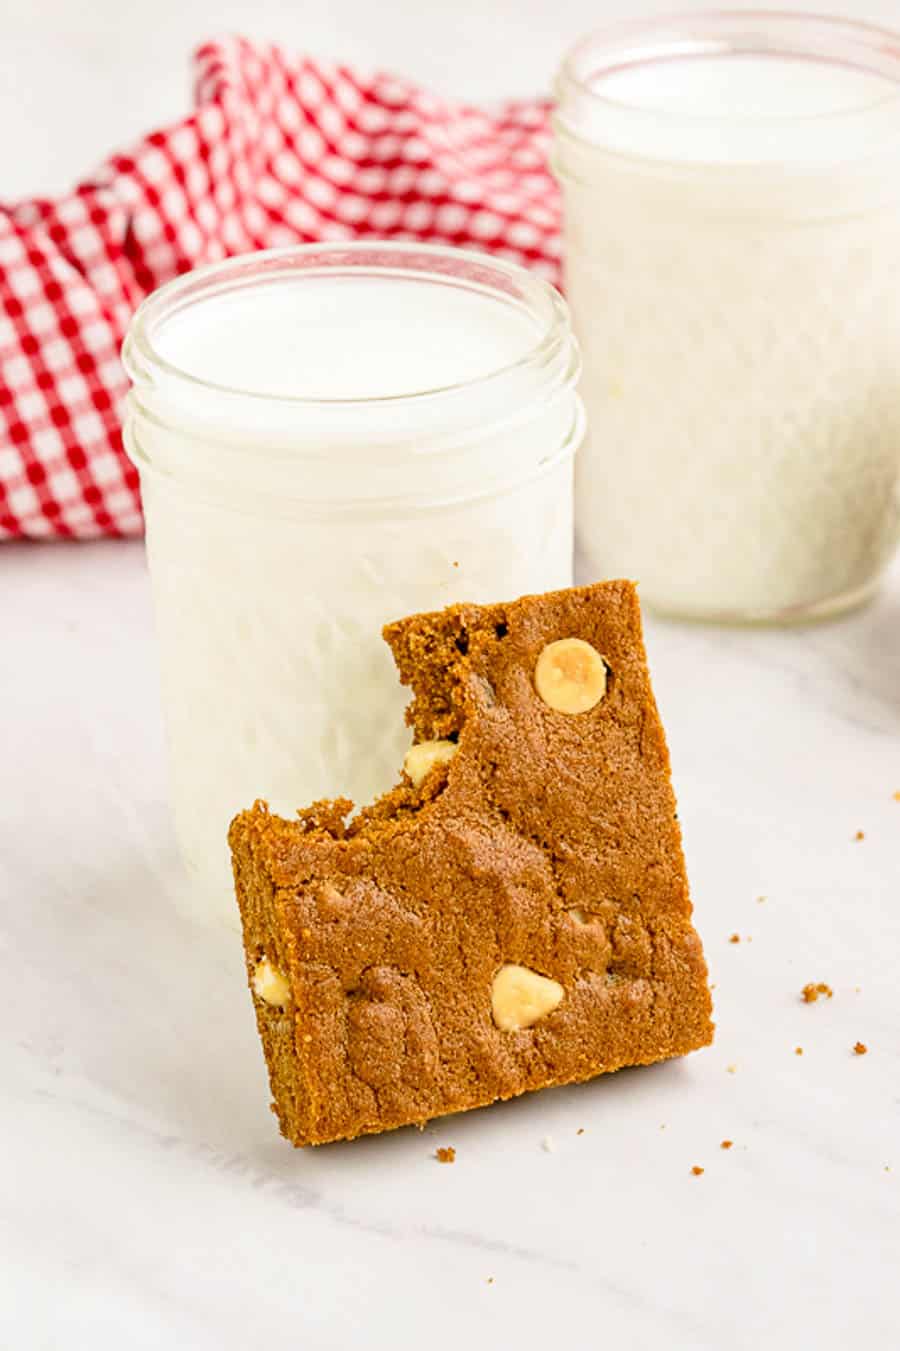 A gingerbread blondie bar with a bite taken out it leaning against a glass of milk.